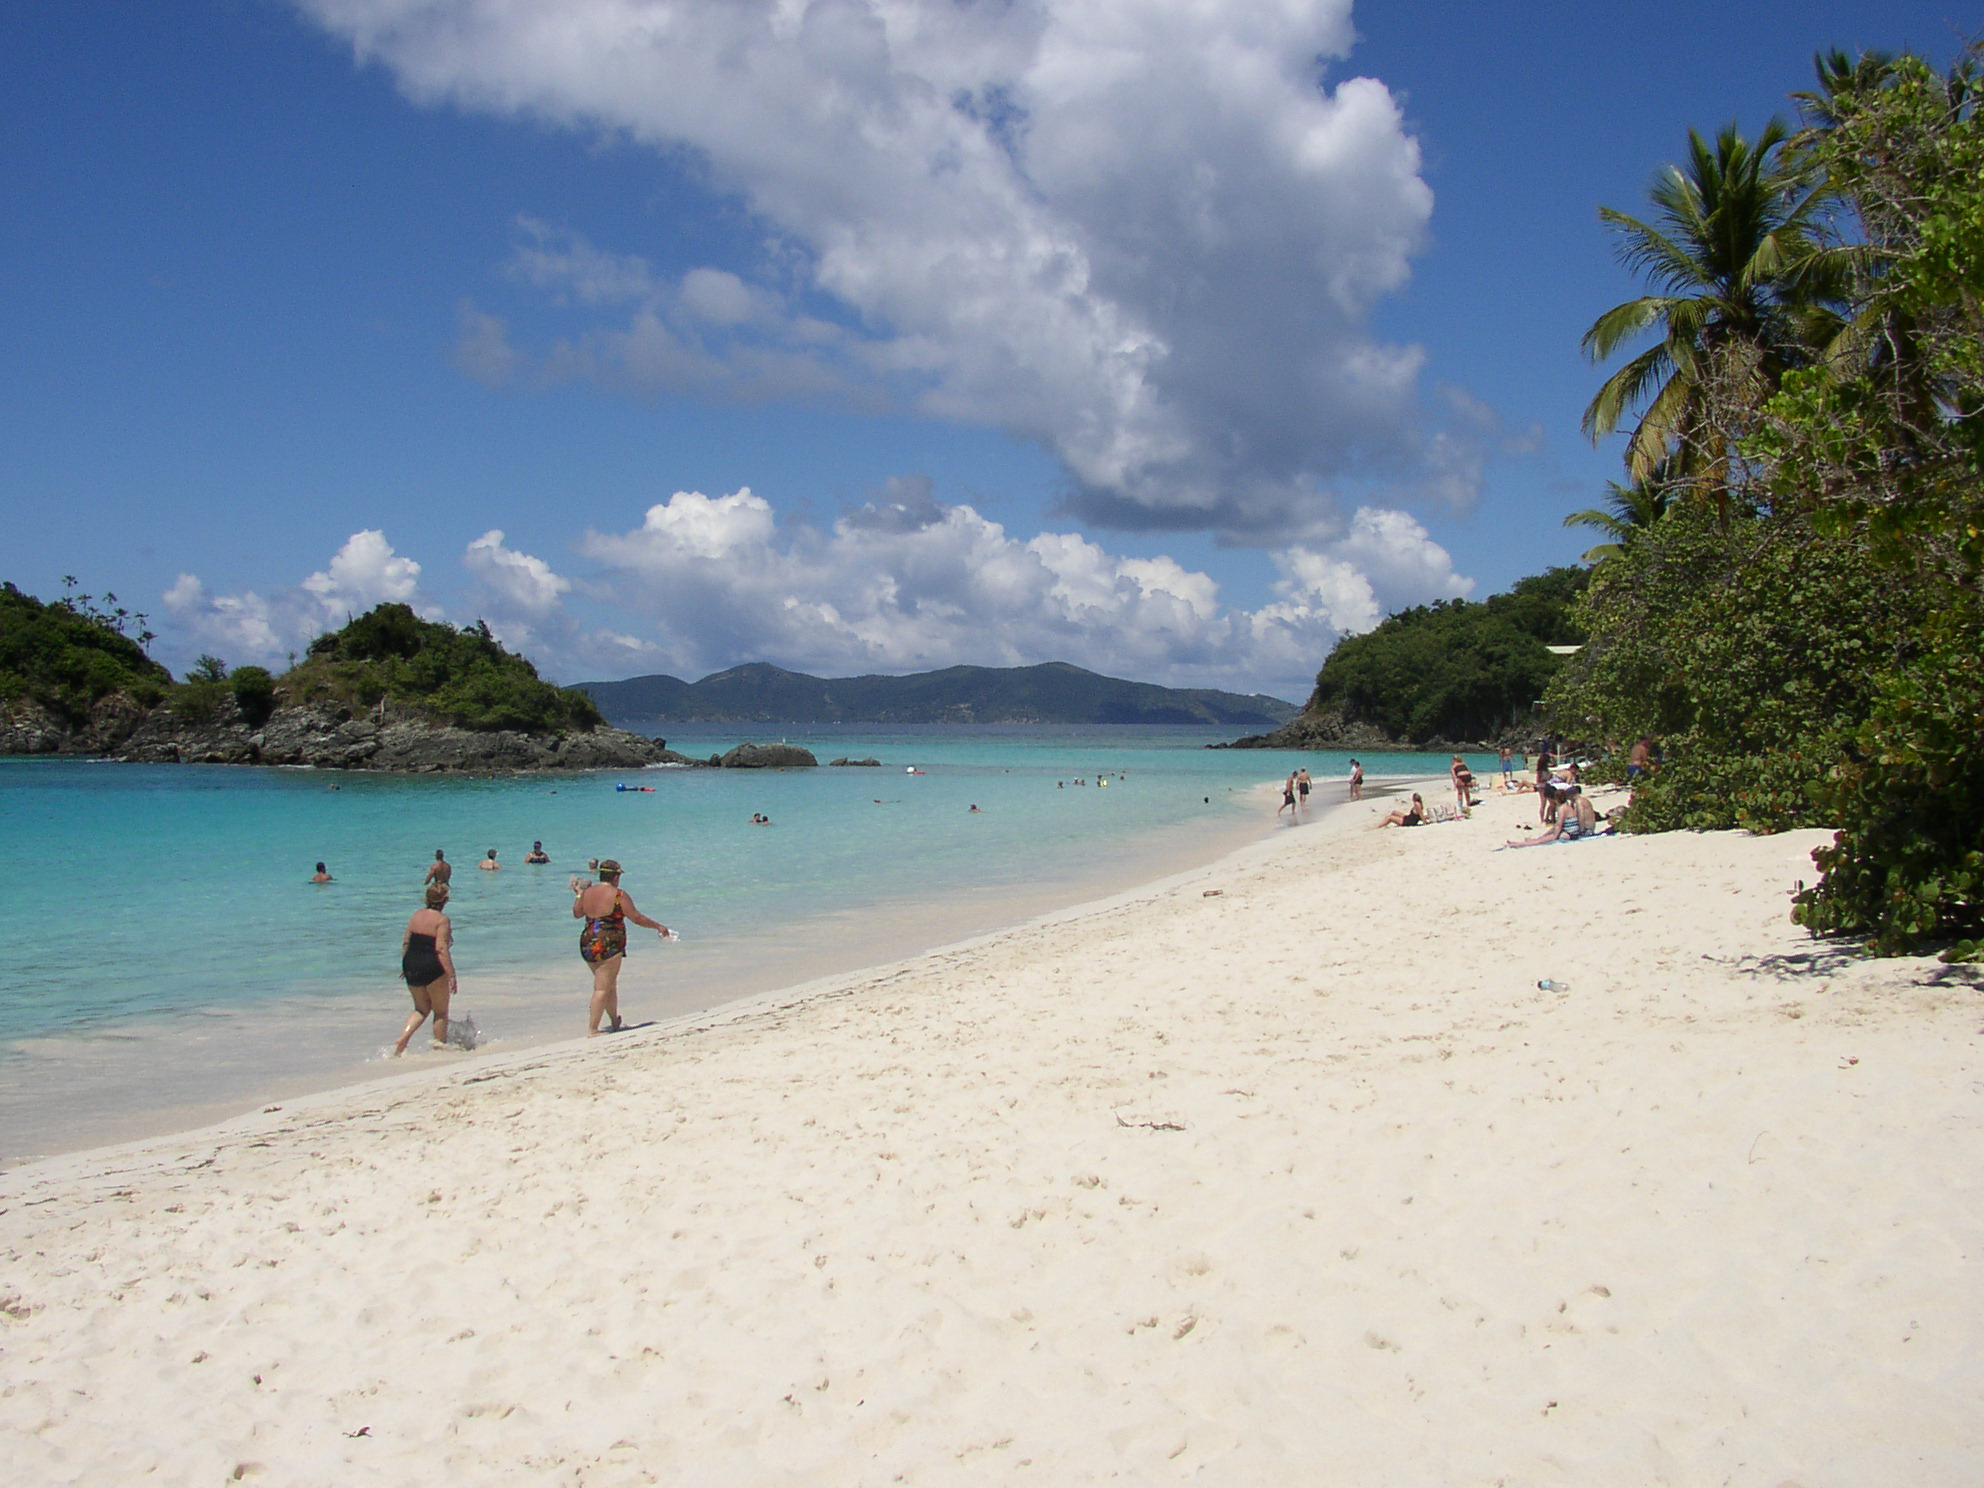 A group of visitors walk along the water's edge, wade, and relax on the white sand and blue water of Trunk Bay Beach.